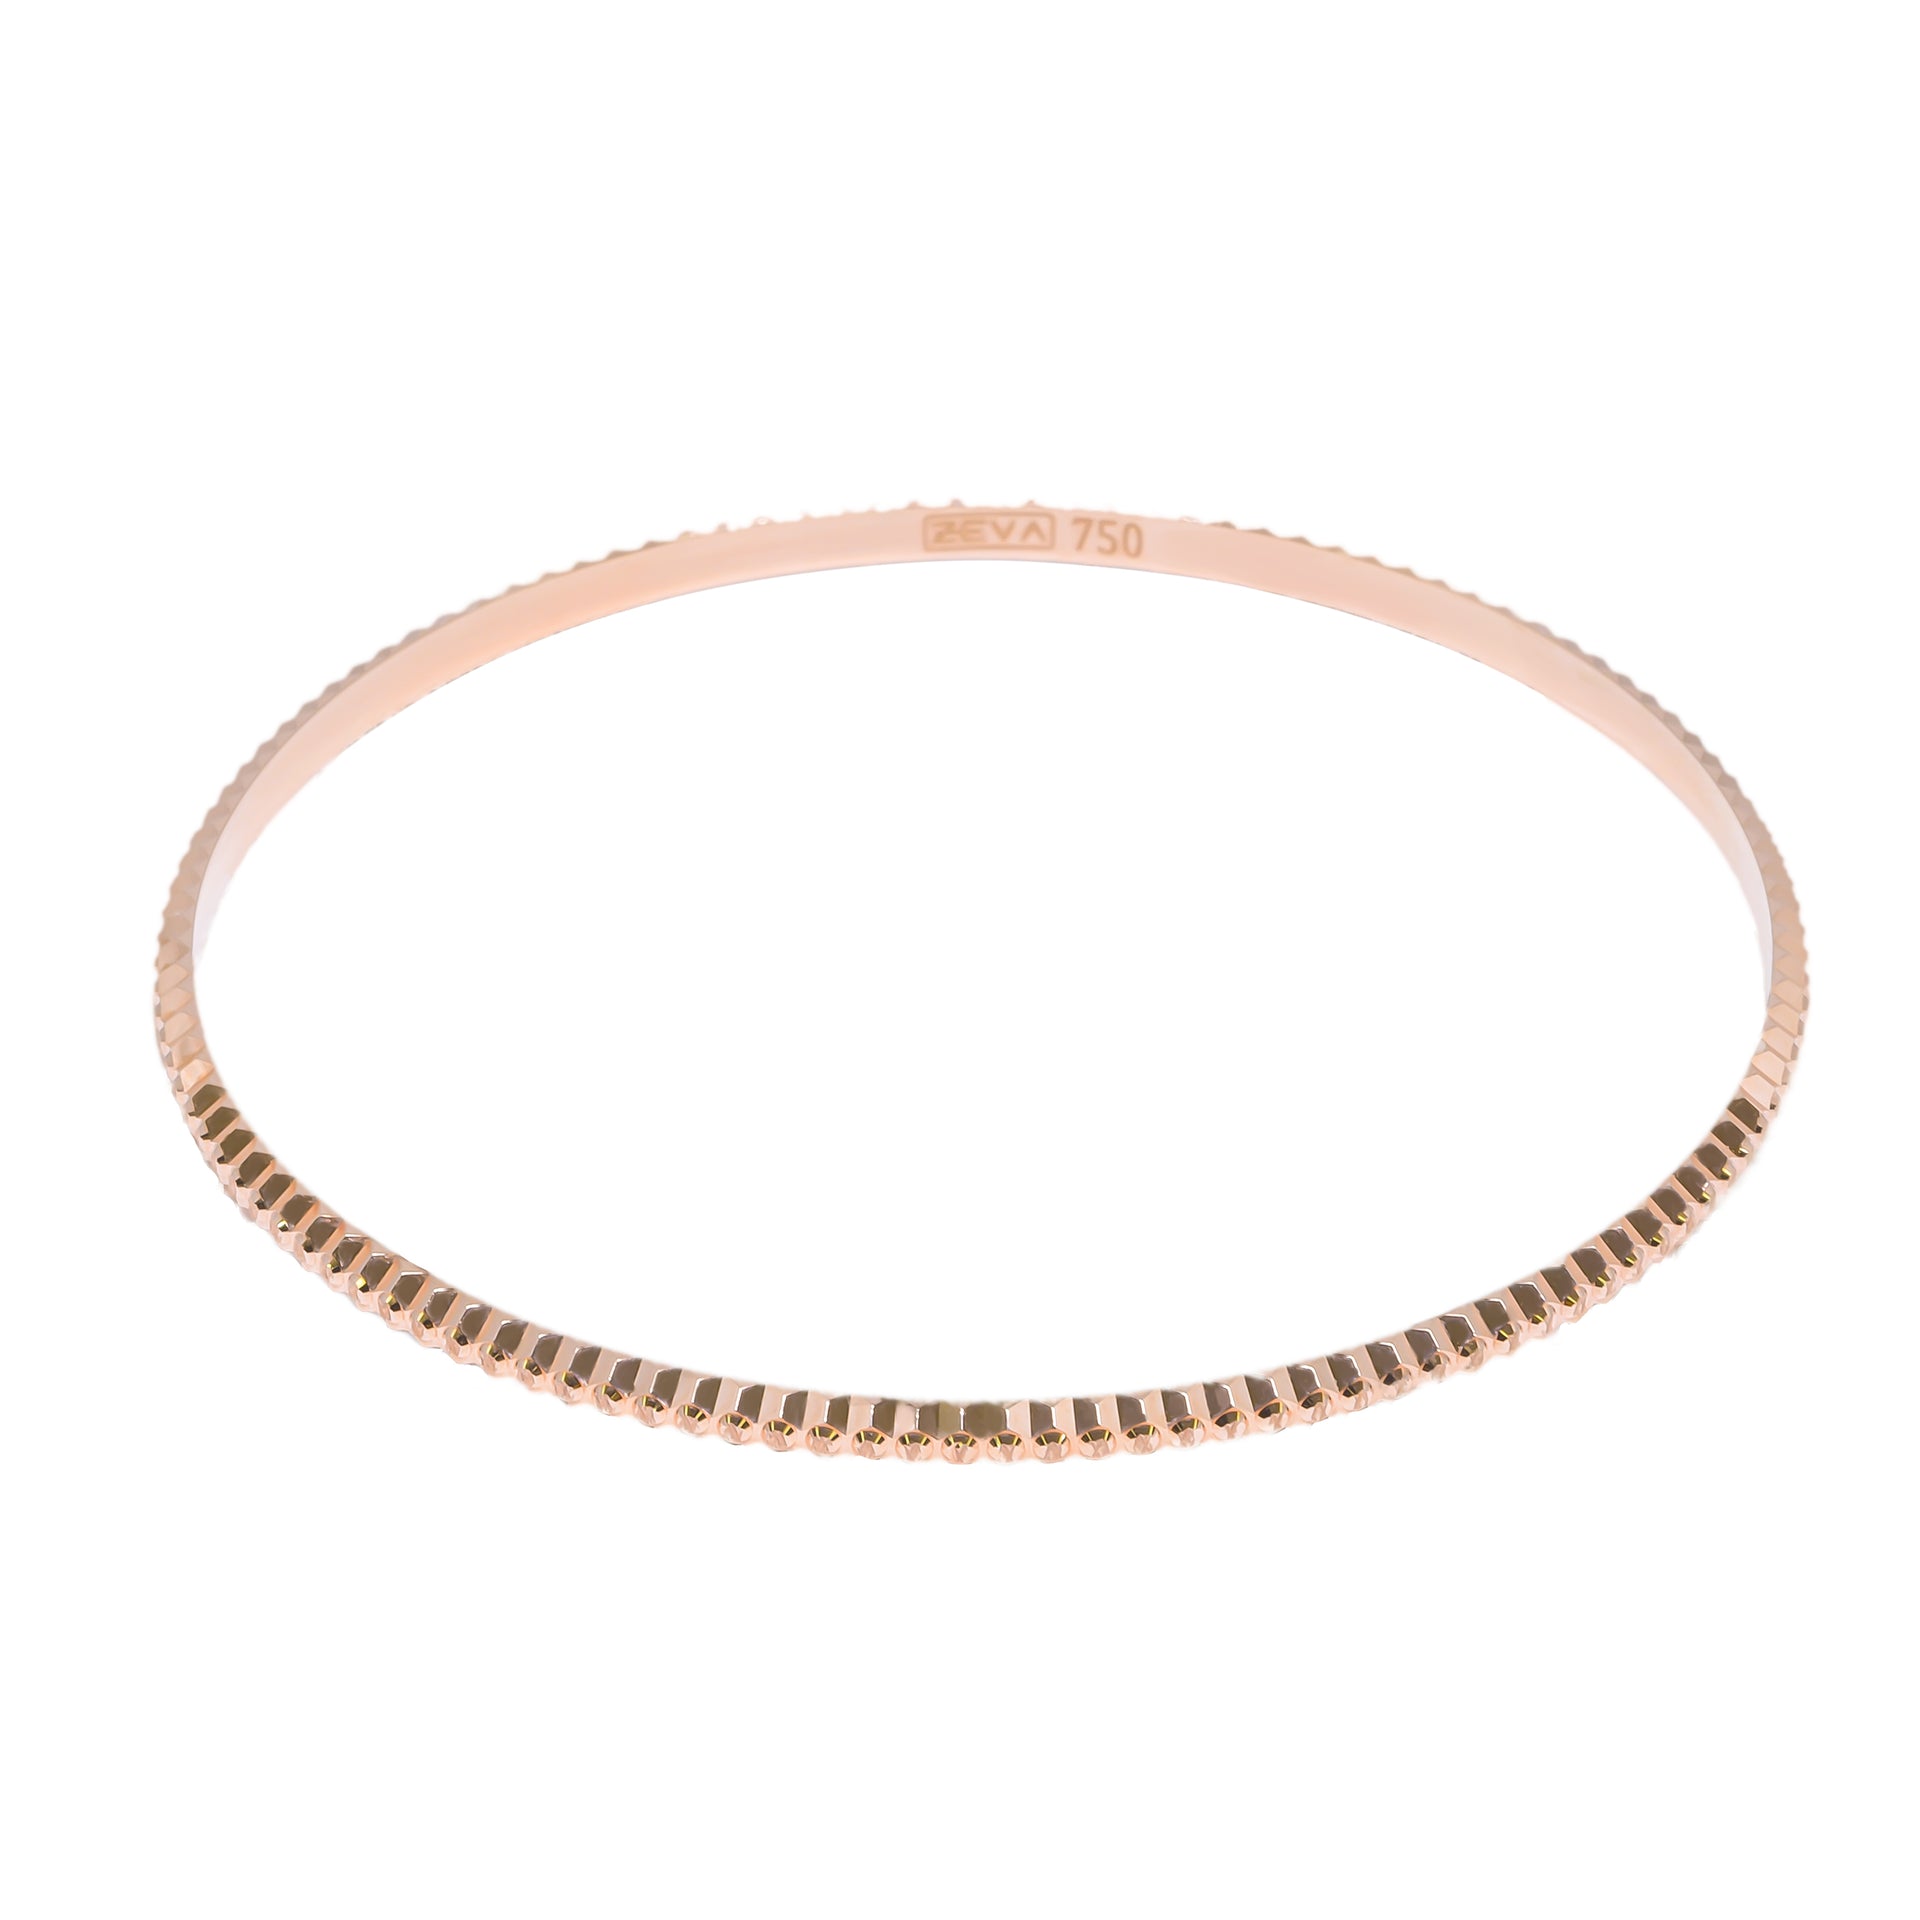 Bangle EARTH IS ROUND 3mm notched and round cut red gold 18k 750